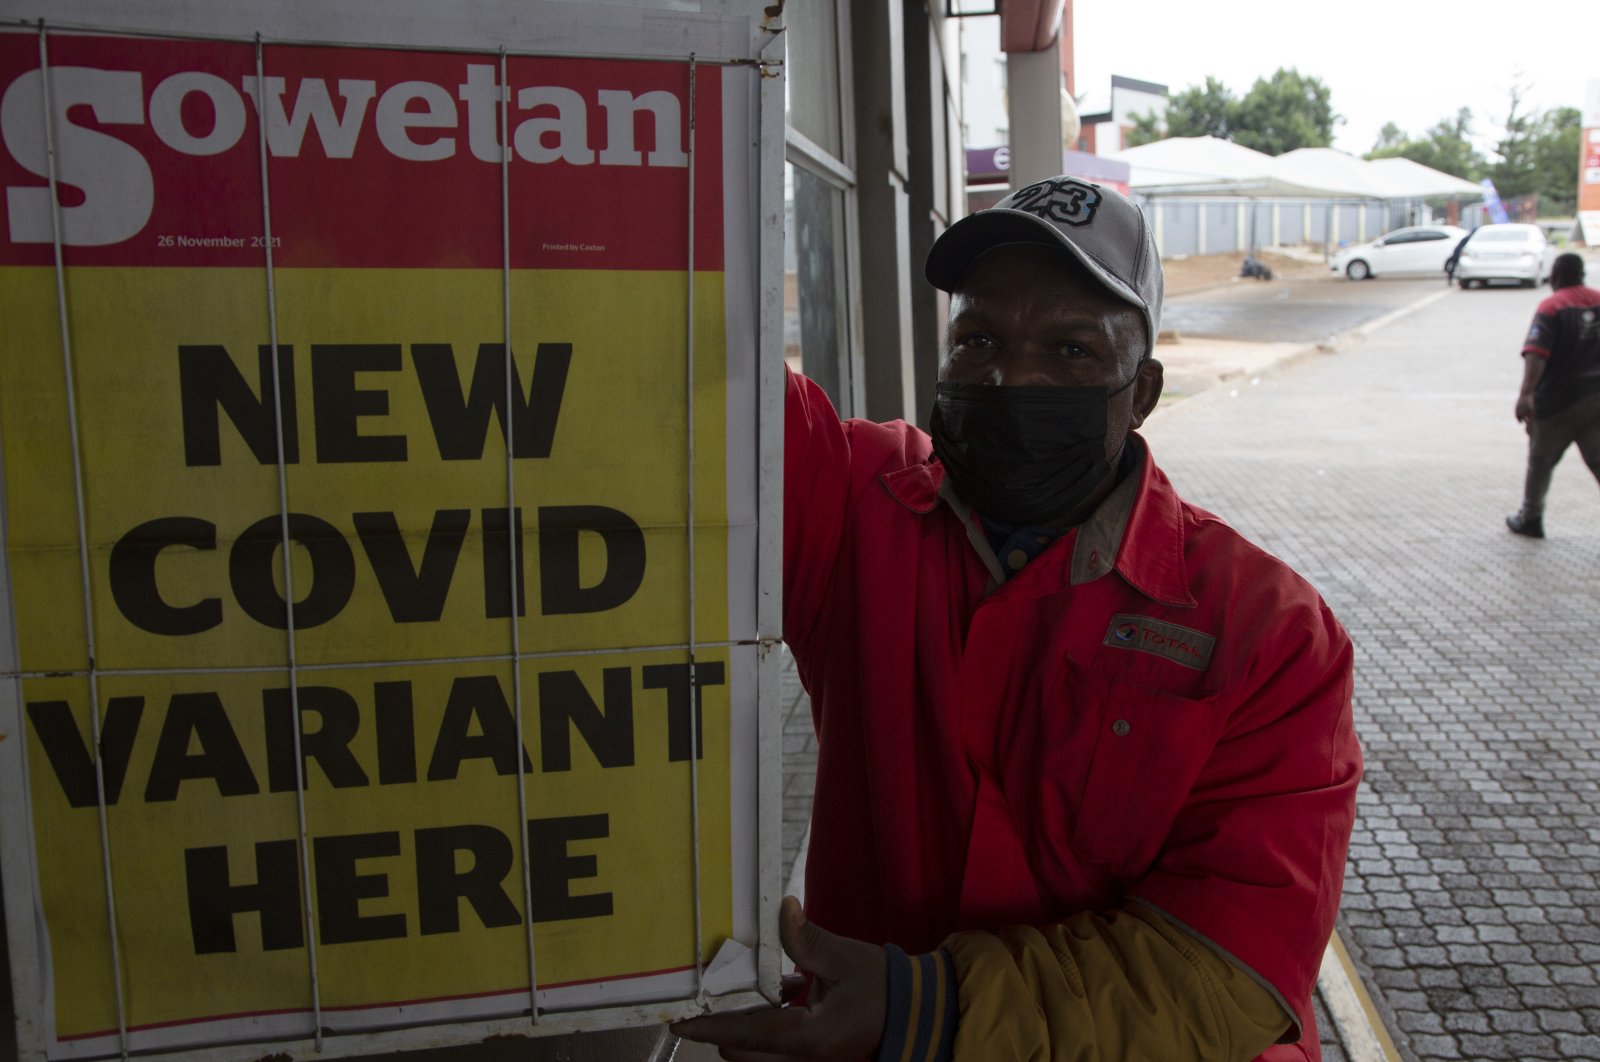 A petrol attendant stands next to a newspaper headline after the omicron variant was reported in the country, in Pretoria, South Africa, Saturday, Nov. 27, 2021. (AP Photo)